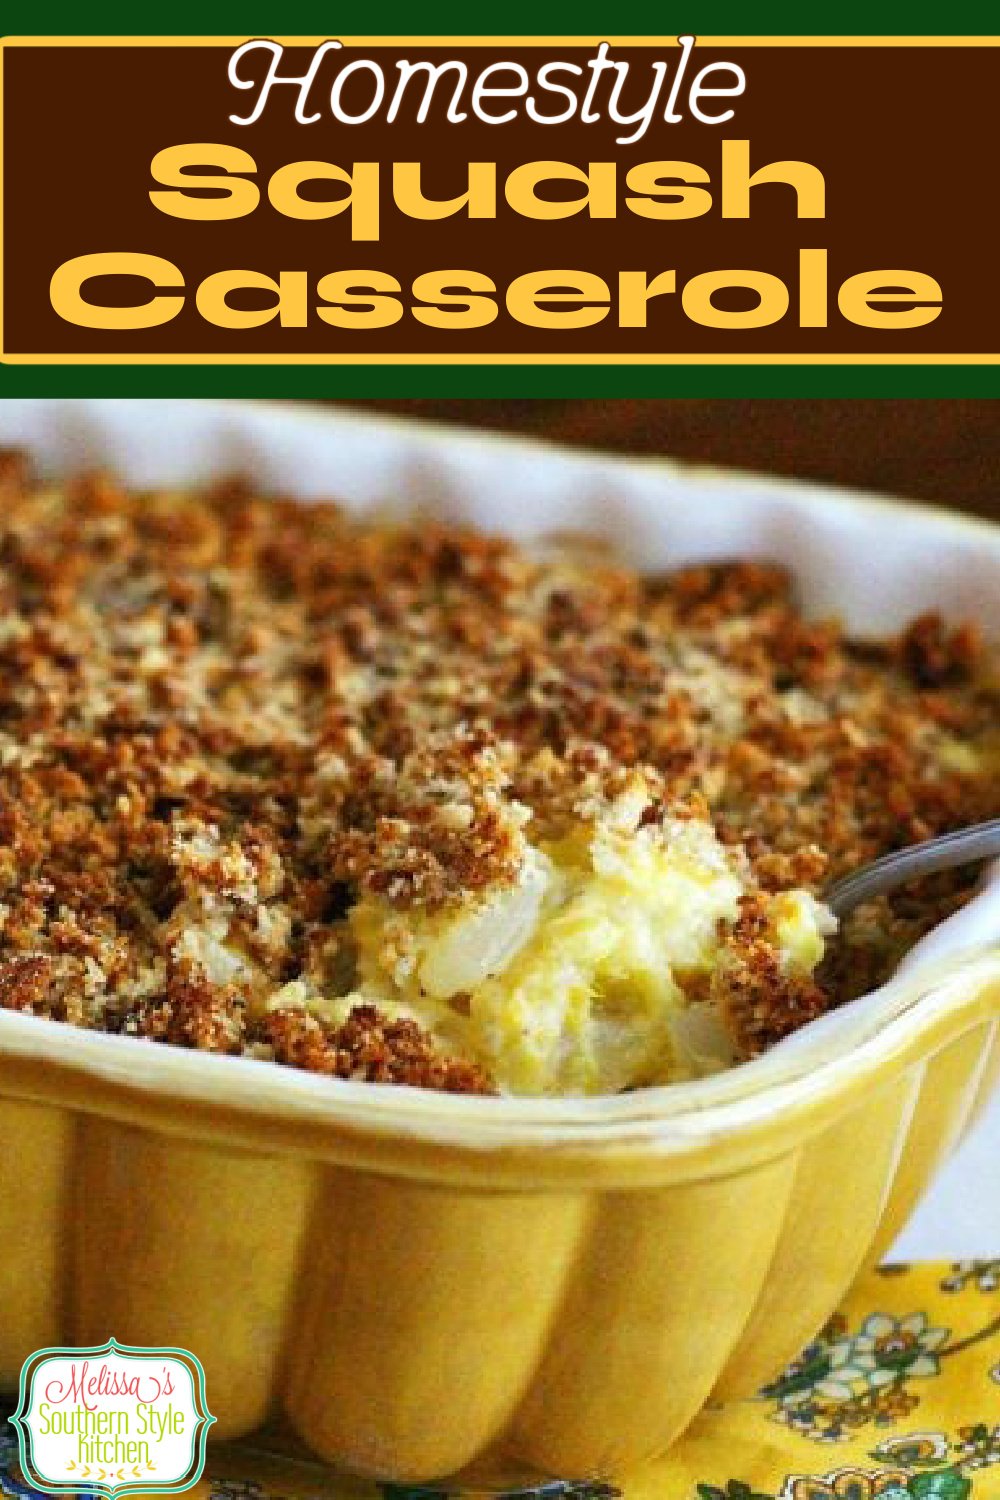 This Homestyle Squash Casserole is the ideal side for any occasion #squash #squashcasserole #summersquash #yellowsquash #casseroles #vegetarian #sidedishrecipes #dinnerideas #dinner #southernfood #southernrecipes #thanksgivingrecipes #fallbaking via @melissasssk